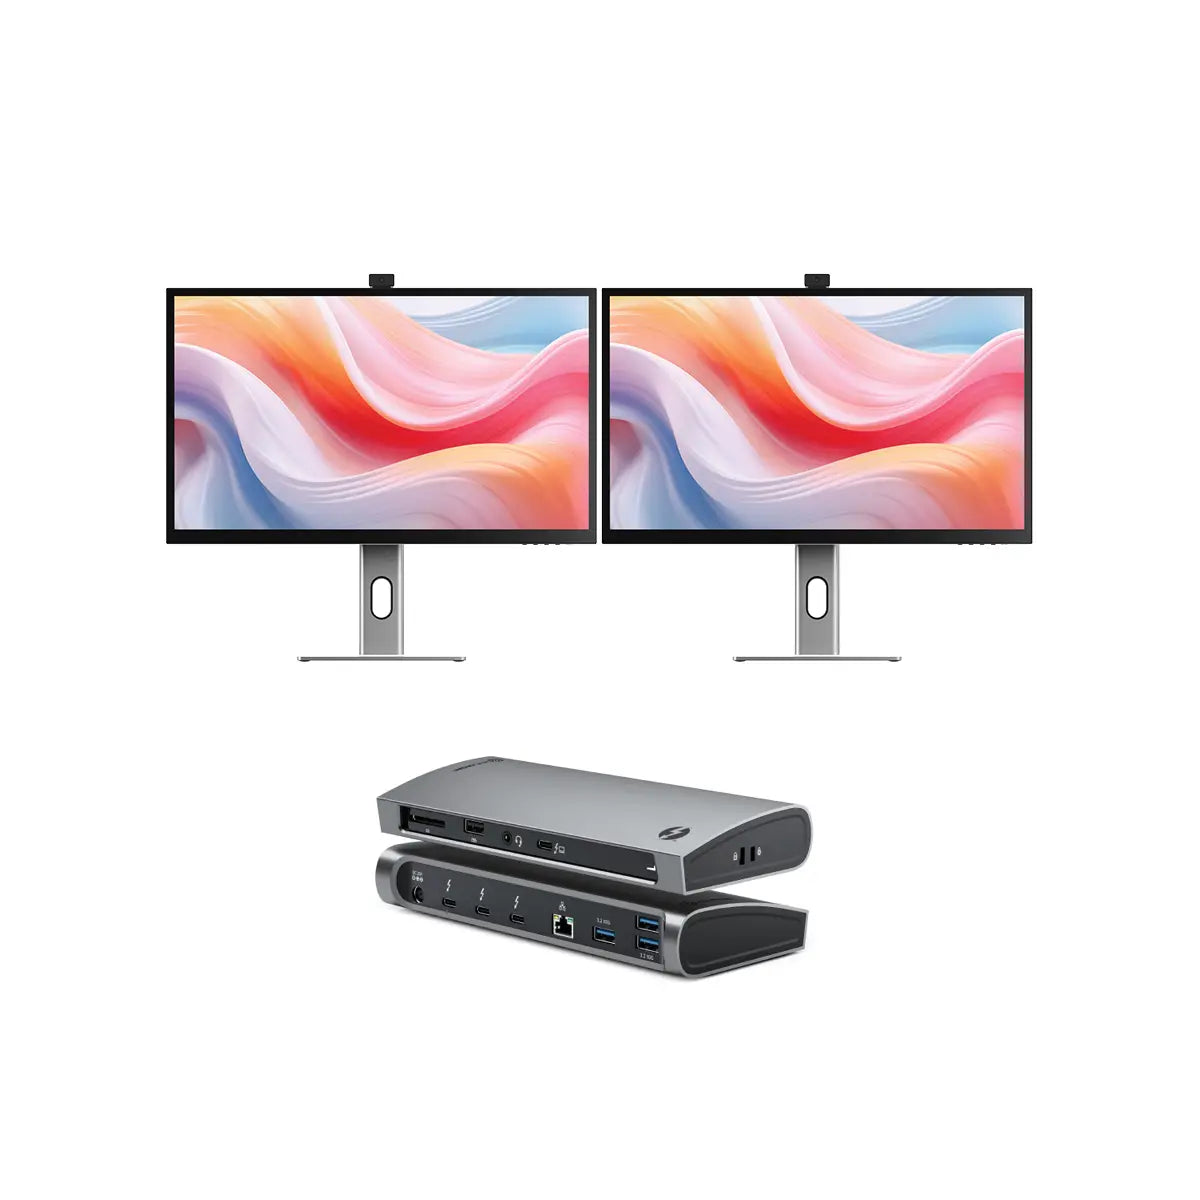 clarity-pro-27-uhd-4k-monitor-with-65w-pd-and-webcam-pack-of-2-thunderbolt-4-blaze-docking-station1